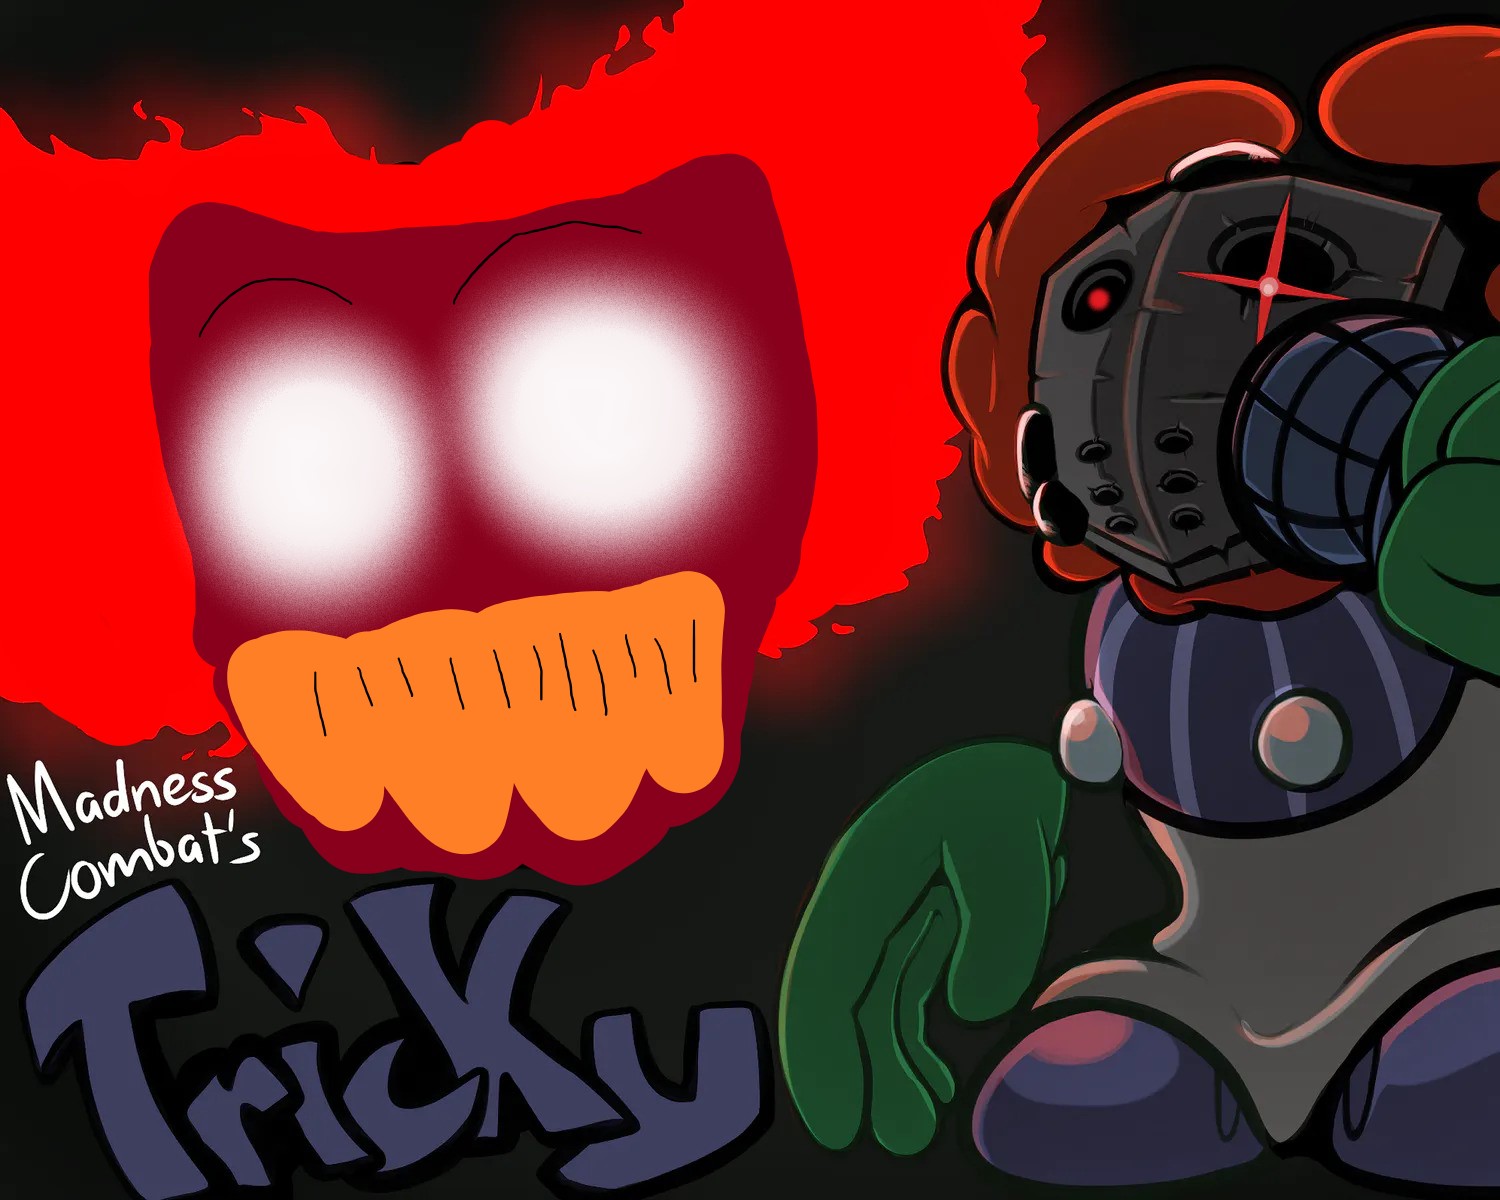 Tricky to Madness combat by PatricioAntiestres on Newgrounds